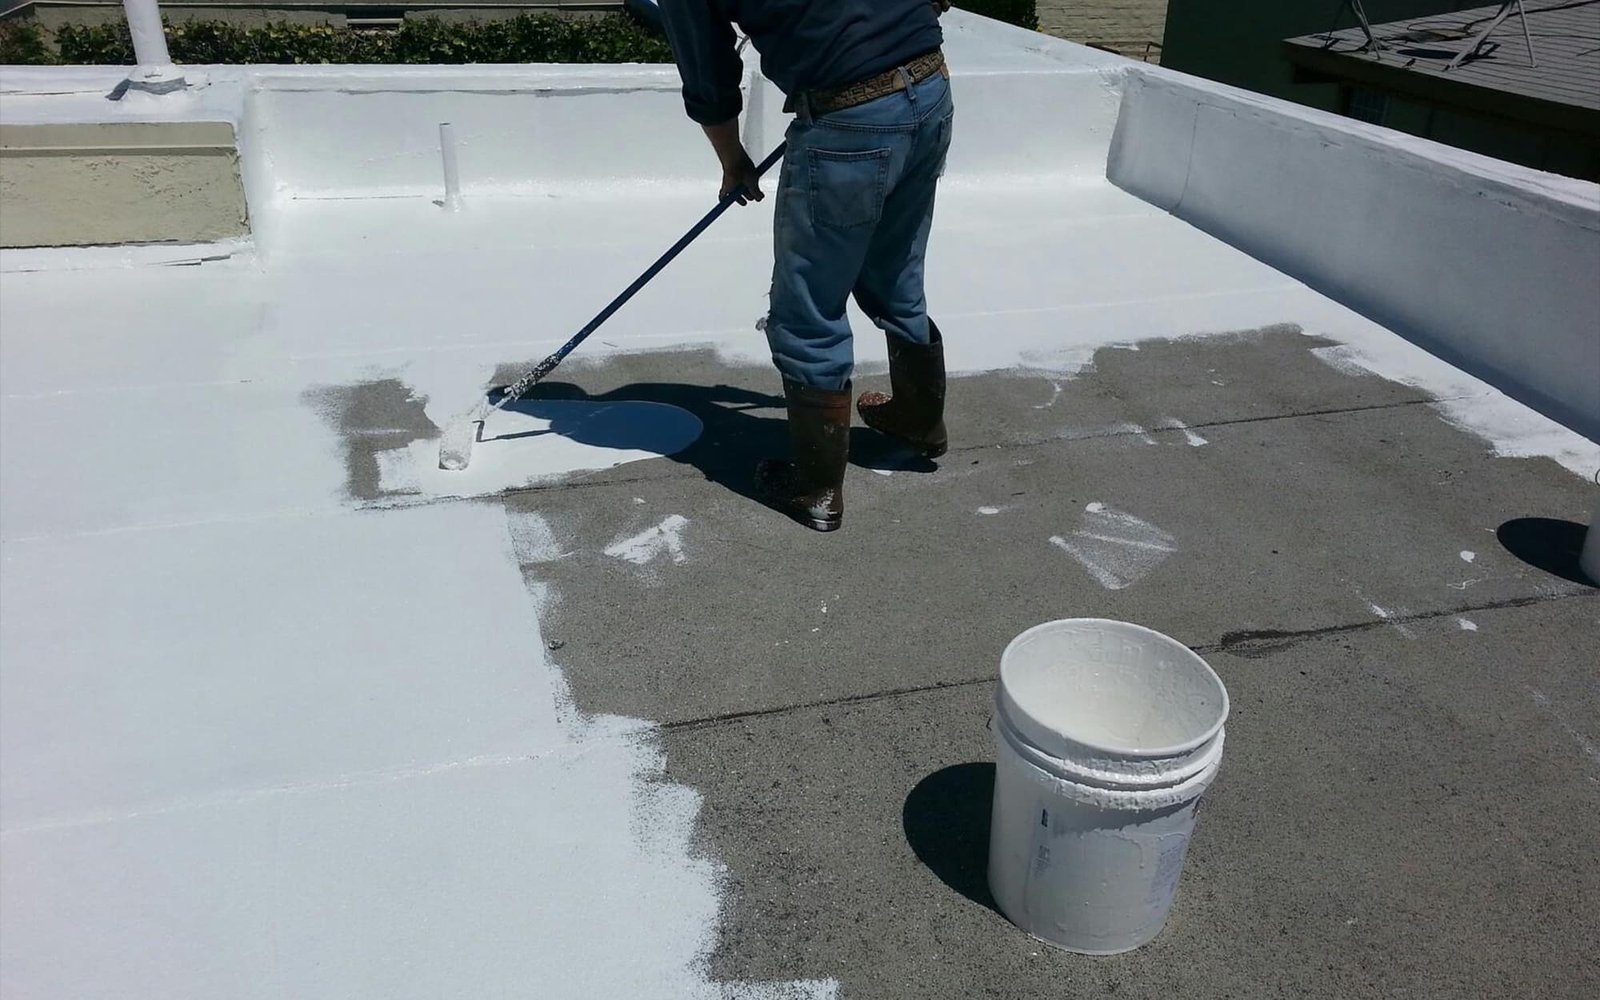 Silicone Roof Coatings